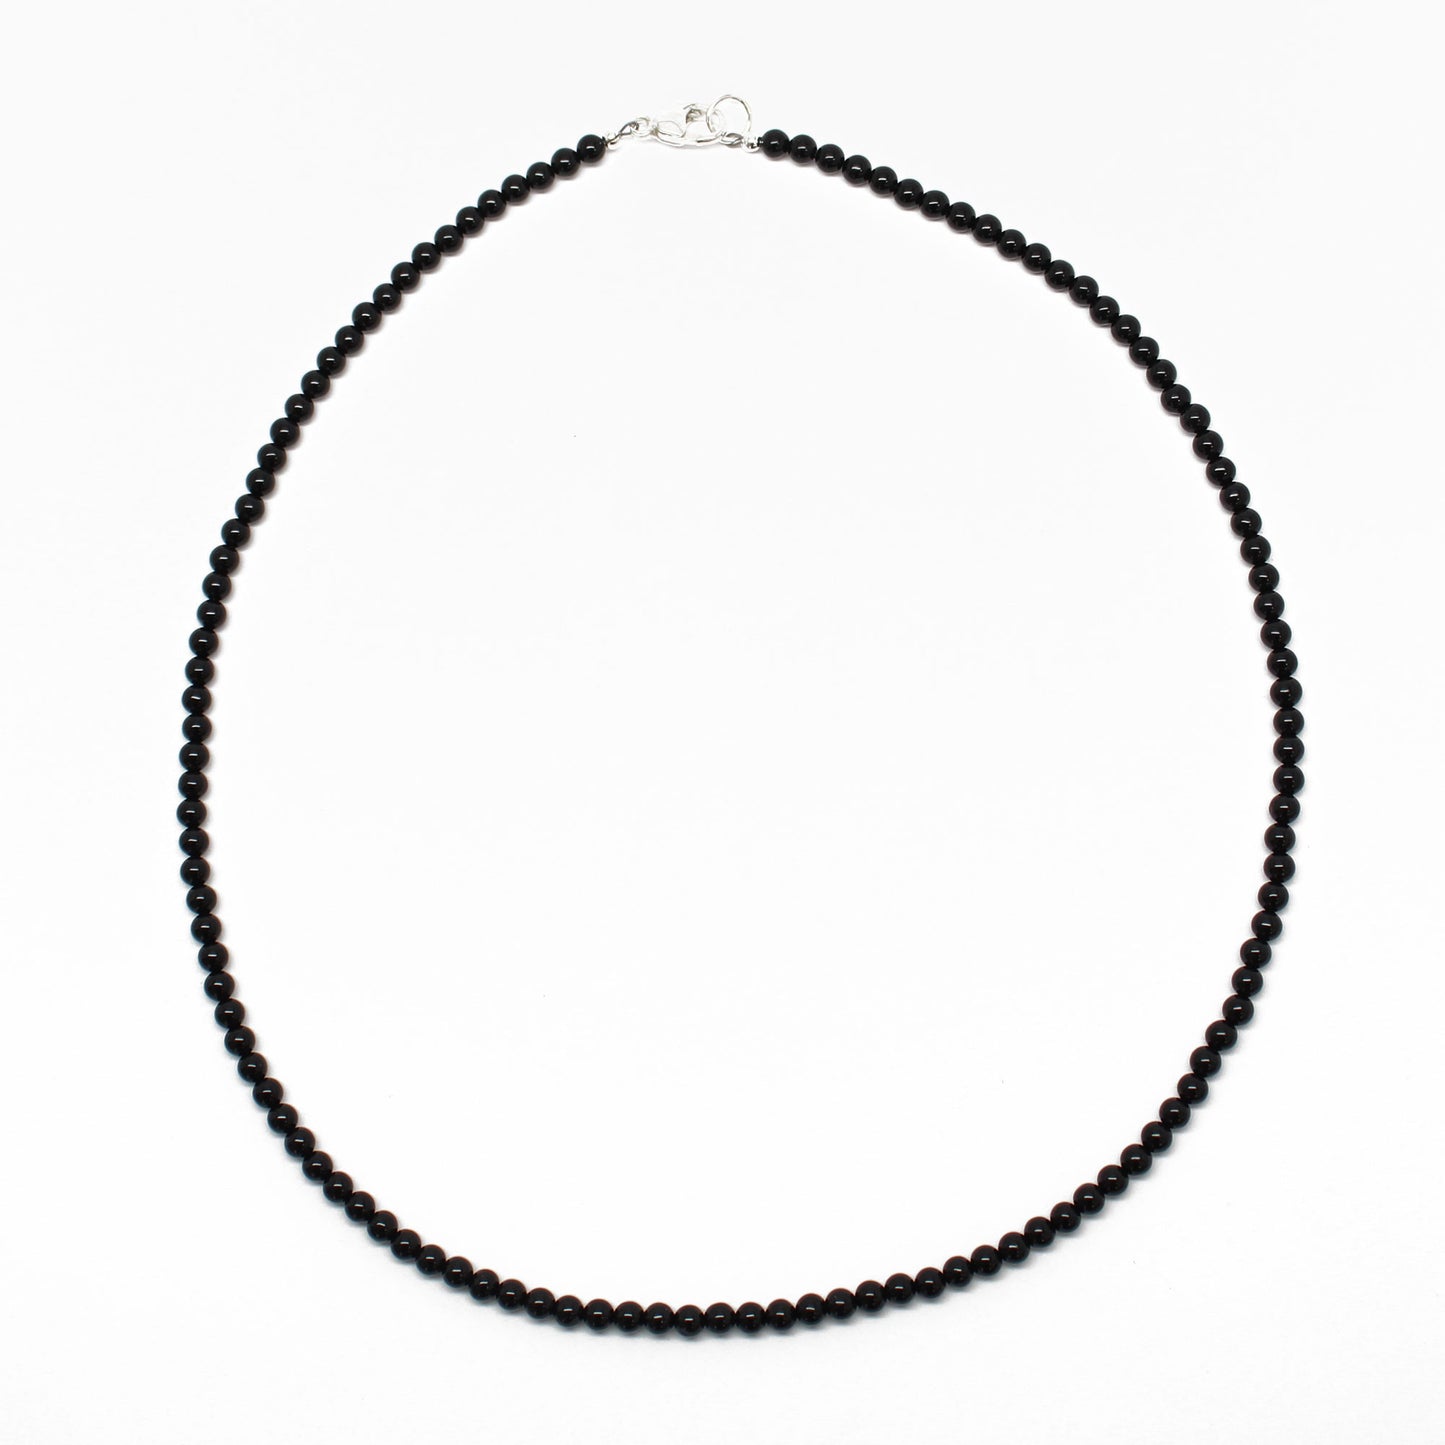 Black Onyx Necklace with Sterling Silver Clasp-3mm